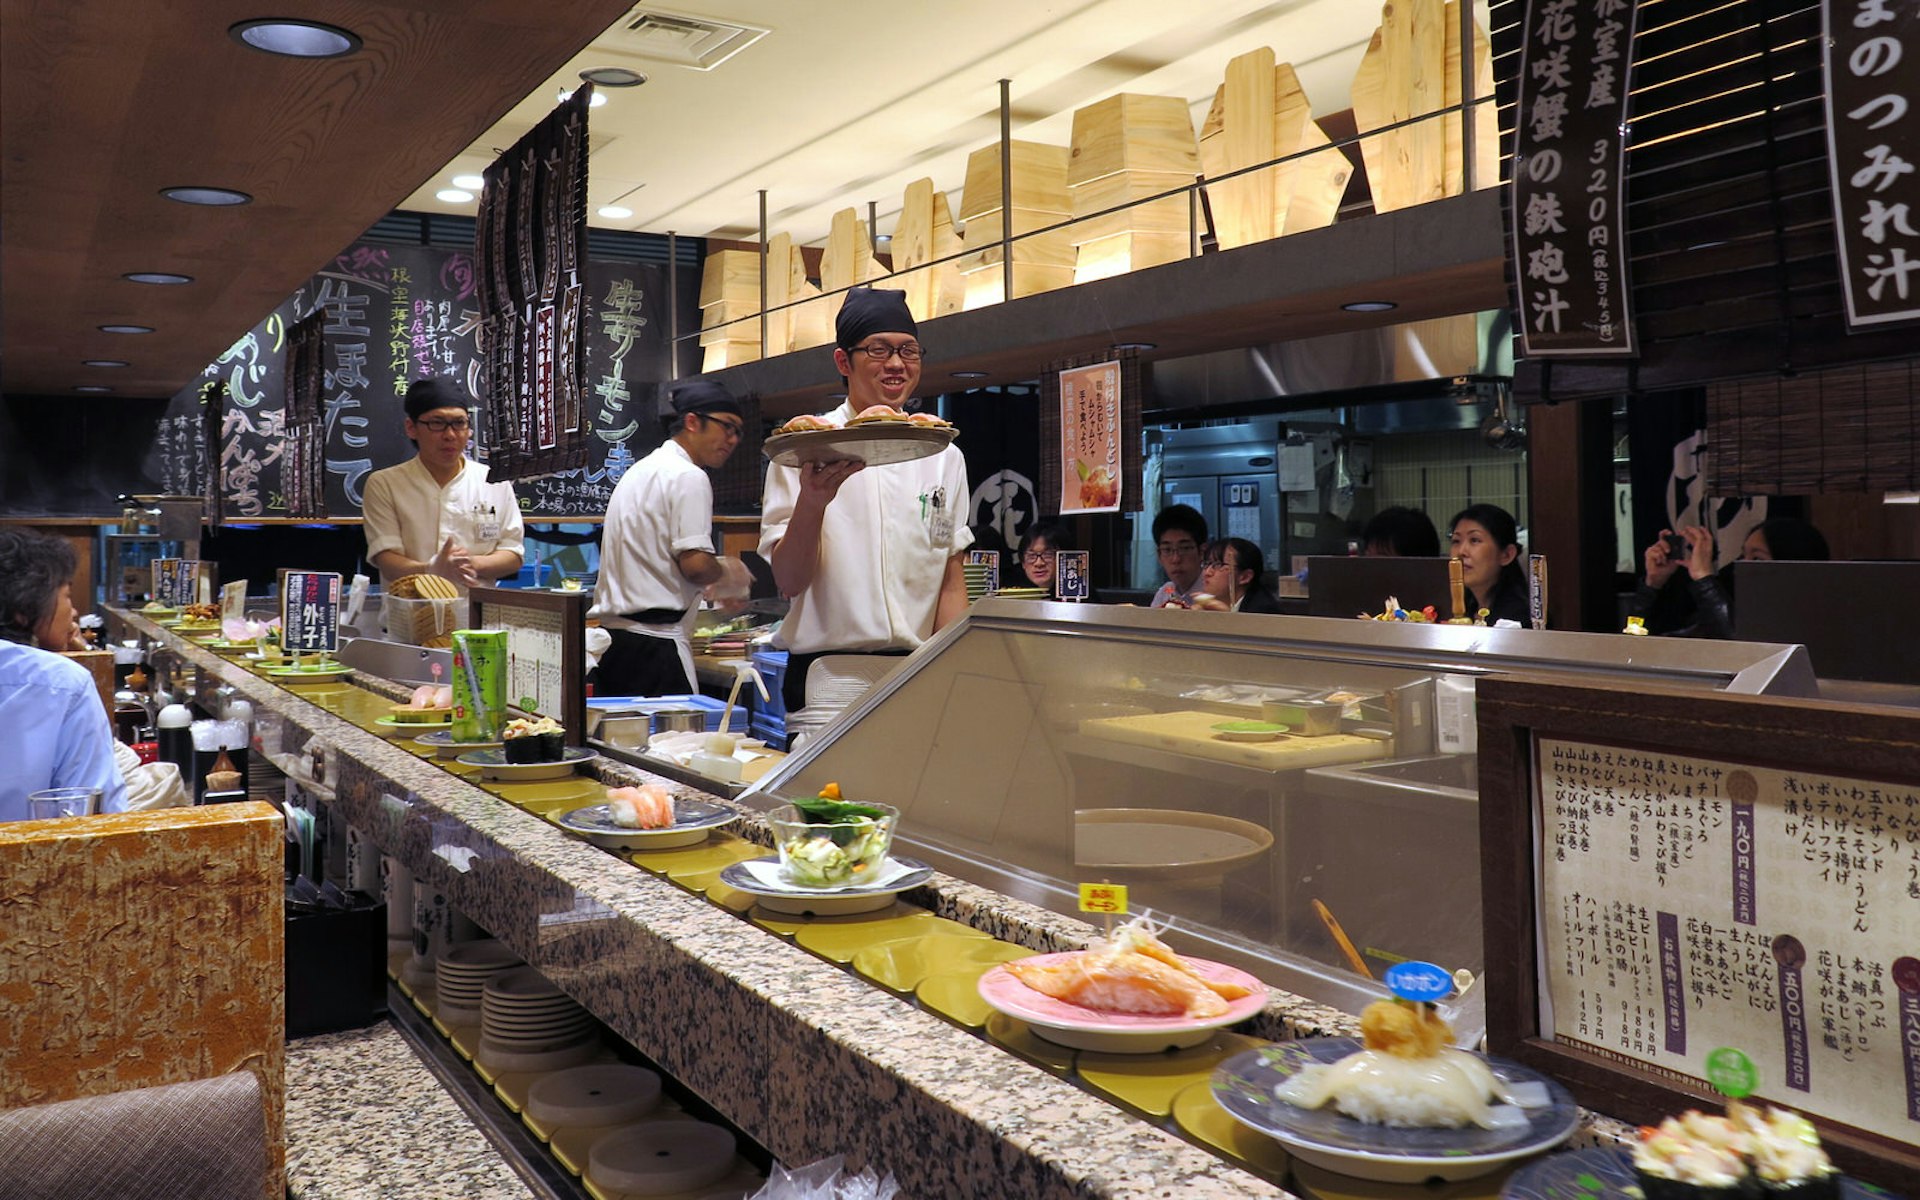 A Tokyo restaurant interior with a conveyor belt, upon which are platefuls of sushi and assorted Japanese fare. Behind the belt in the kitchen, chefs clad in white, smiling, prepare and hold aloft dishes.